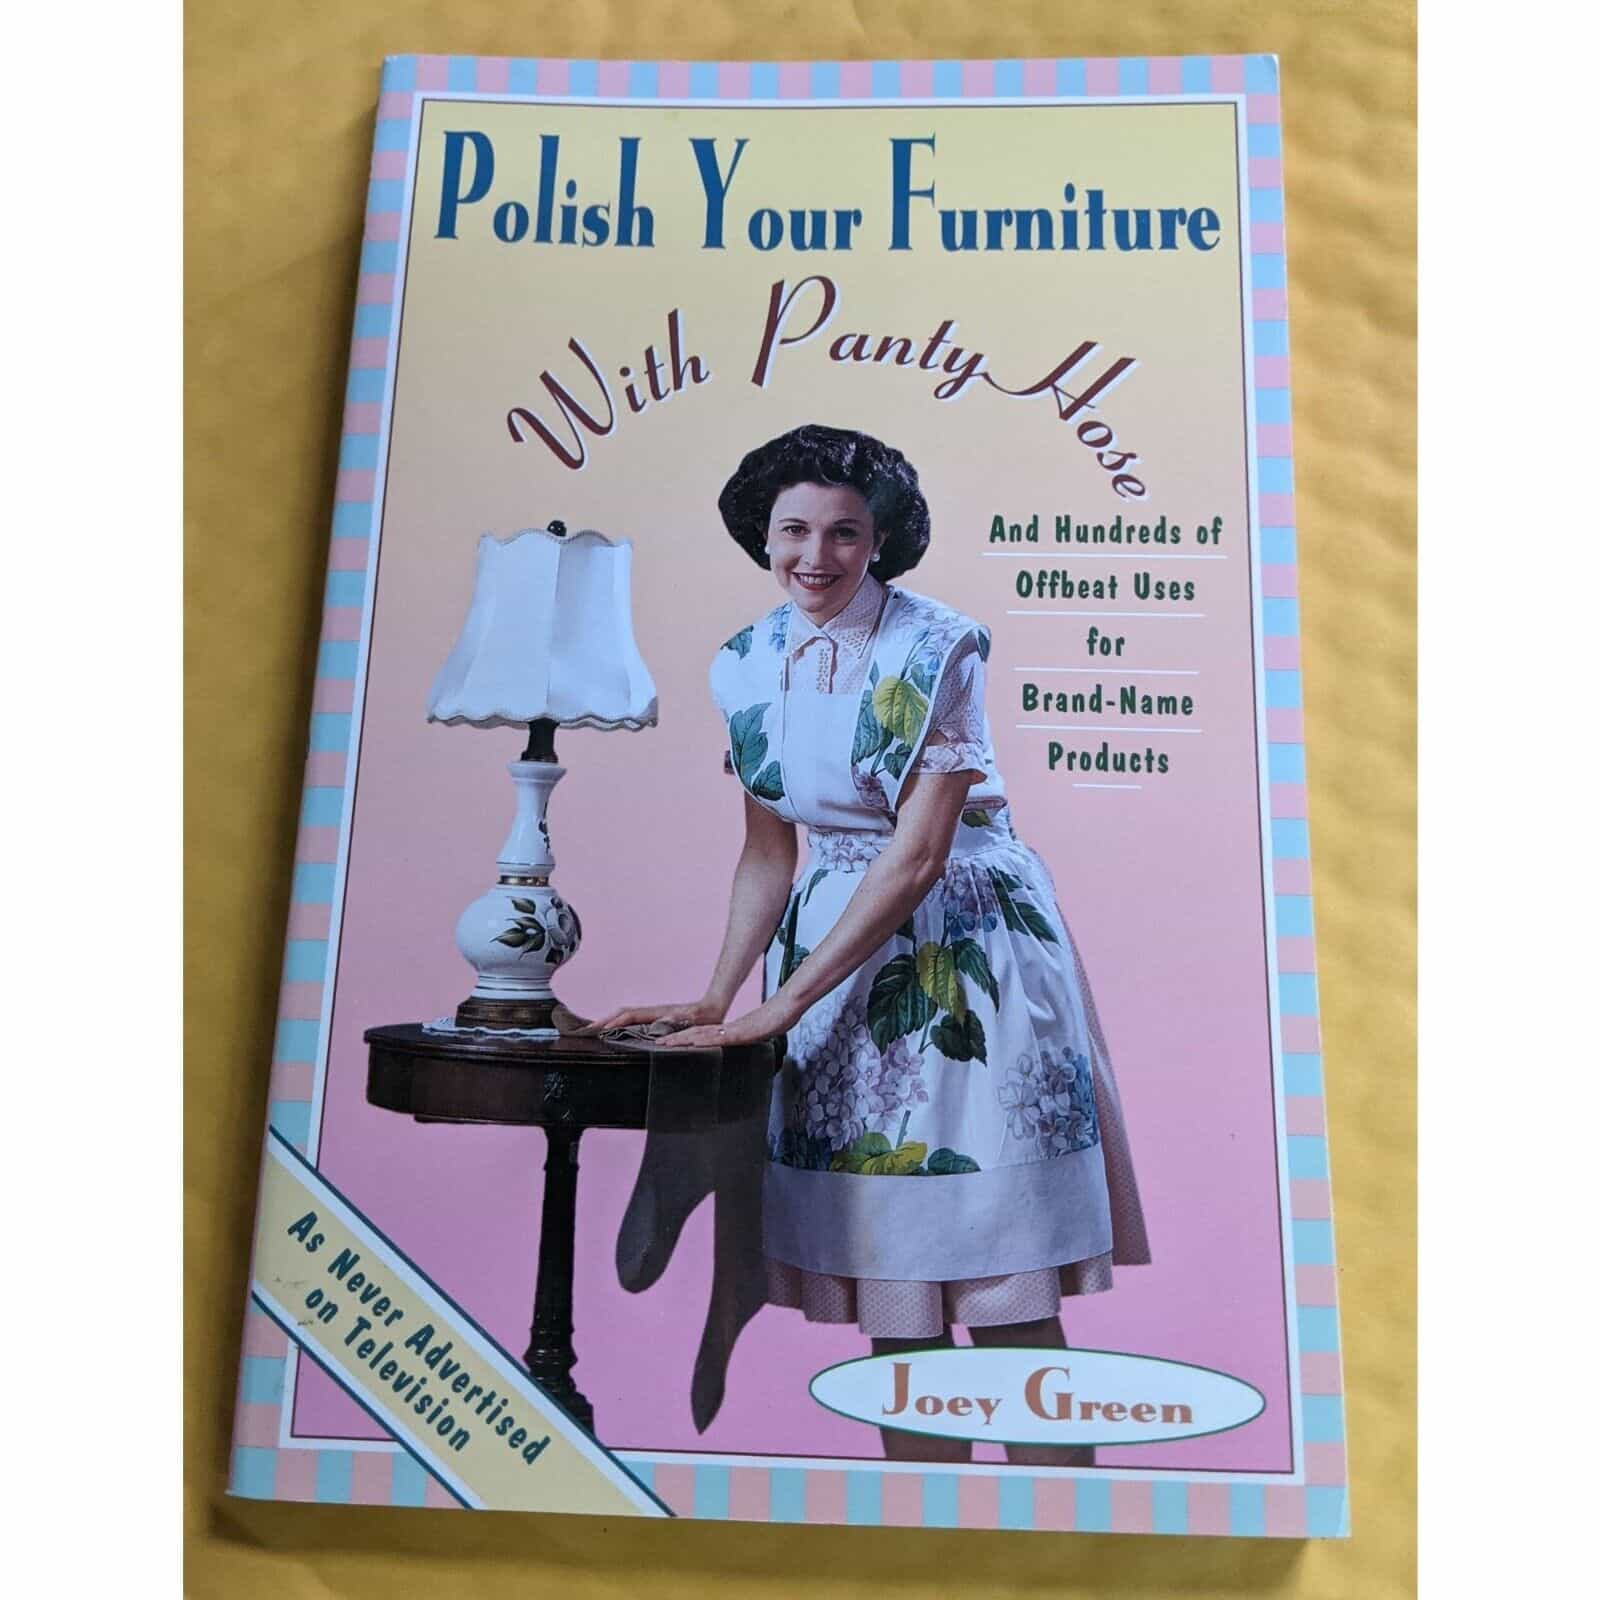 Polish Your Furniture With Pantyhose by Joey Green Book